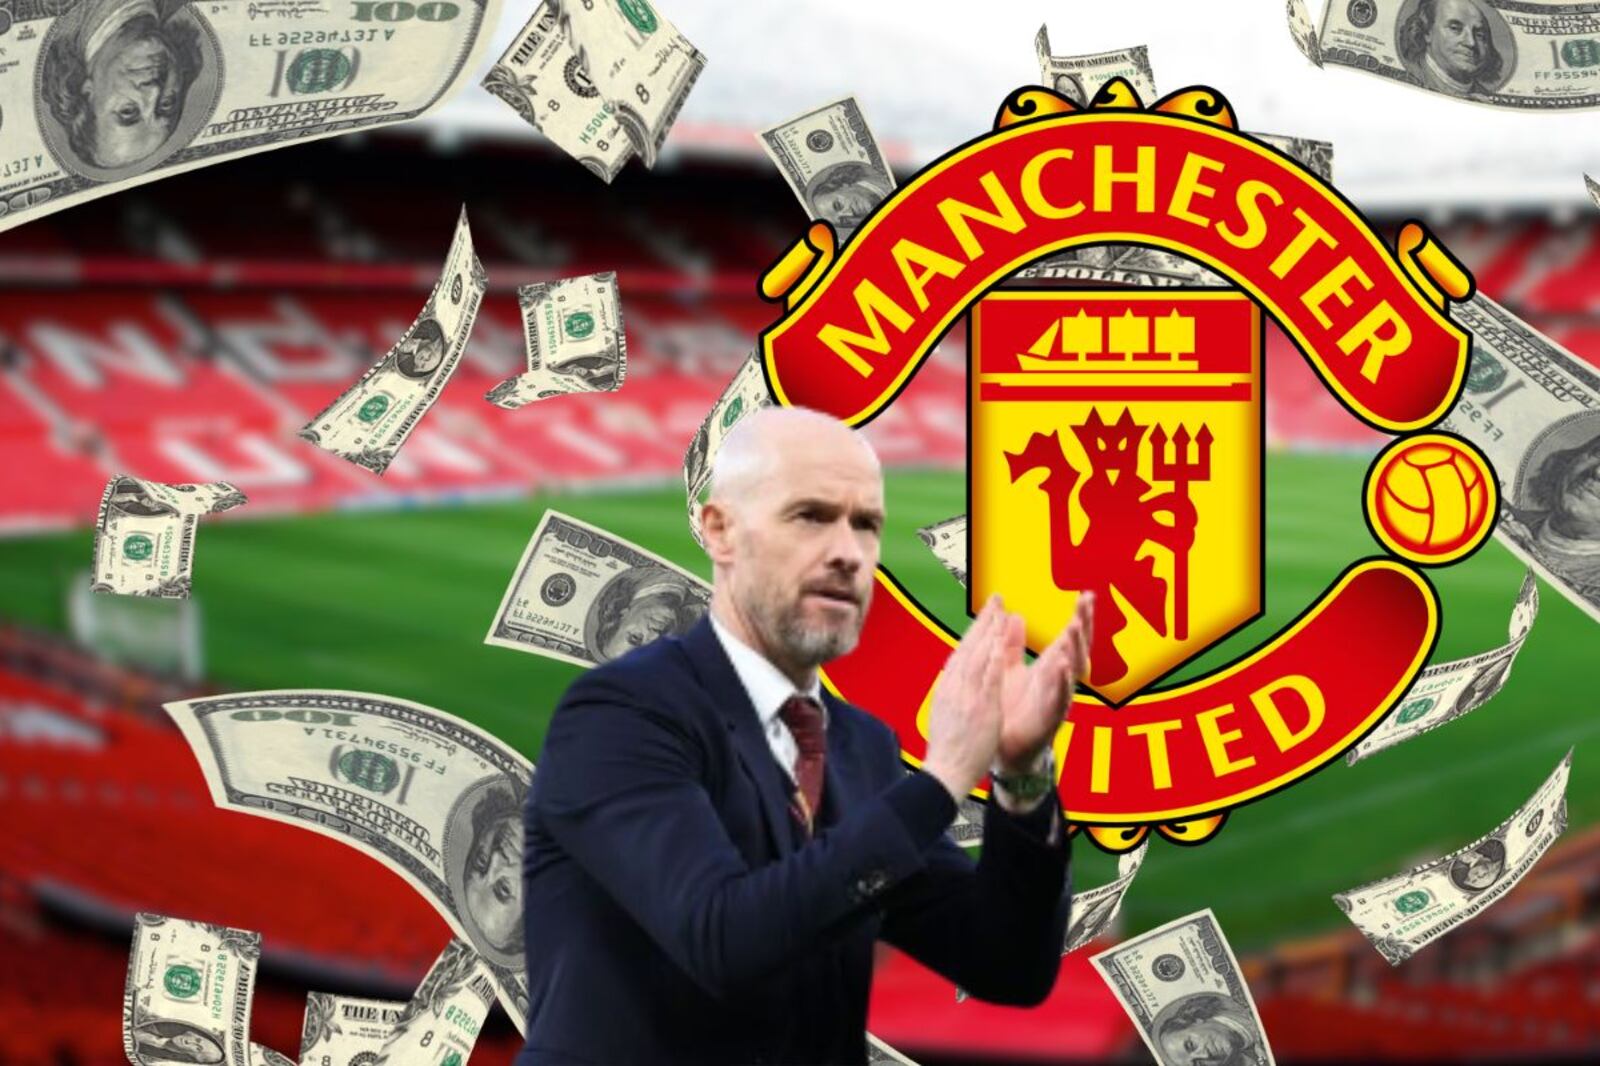 The €60 million top player wanted by Manchester United, thrills ten Hag